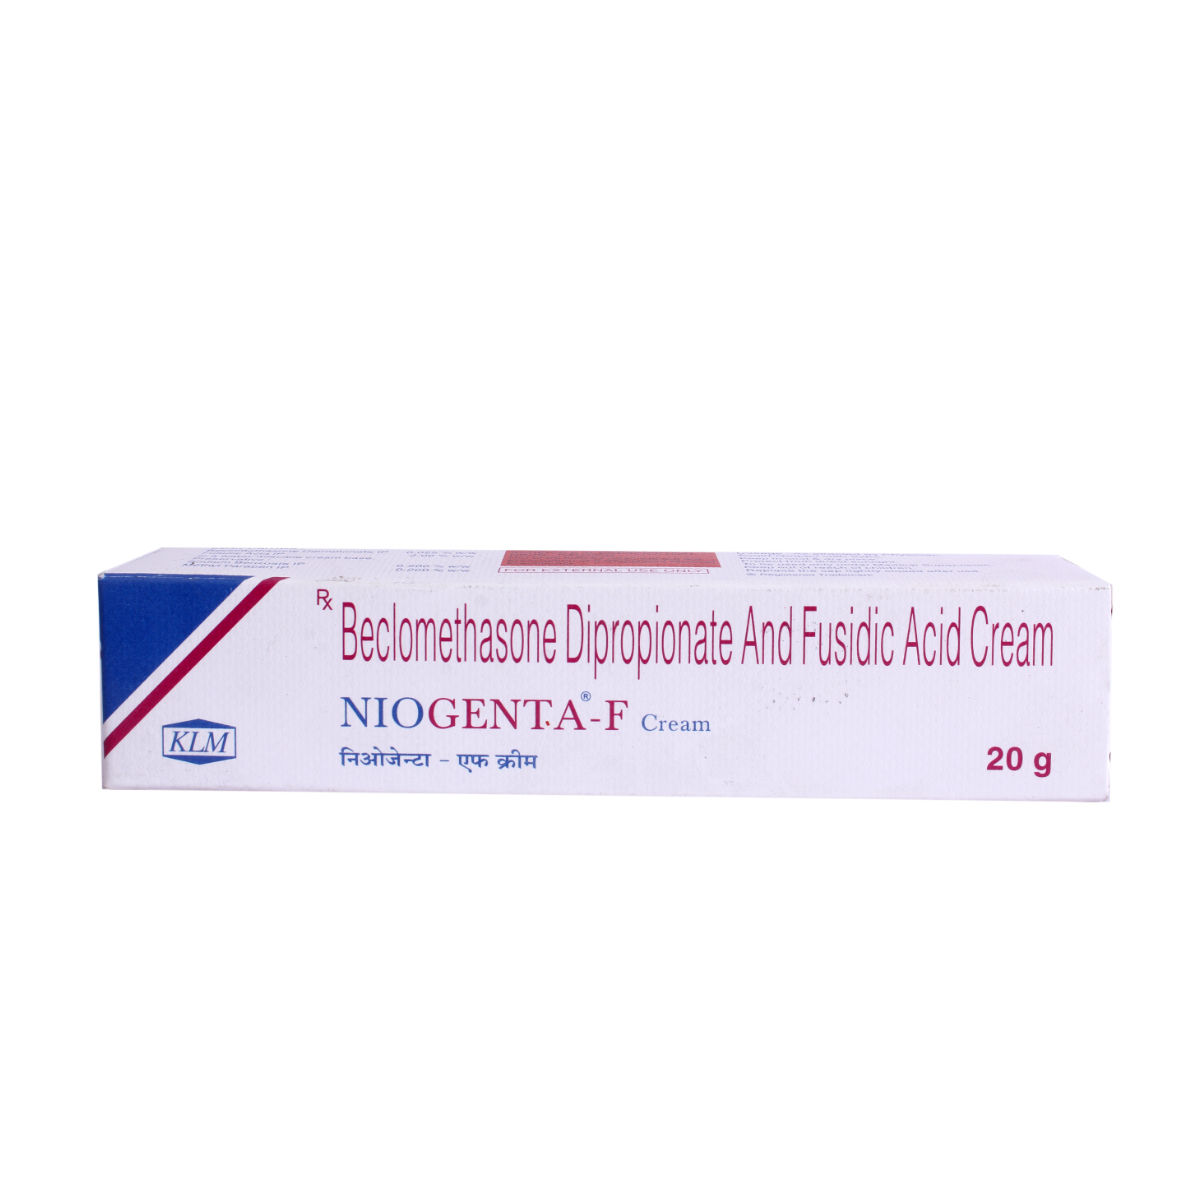 Niogenta F Cream 20 gm Price, Uses, Side Effects, Composition ...